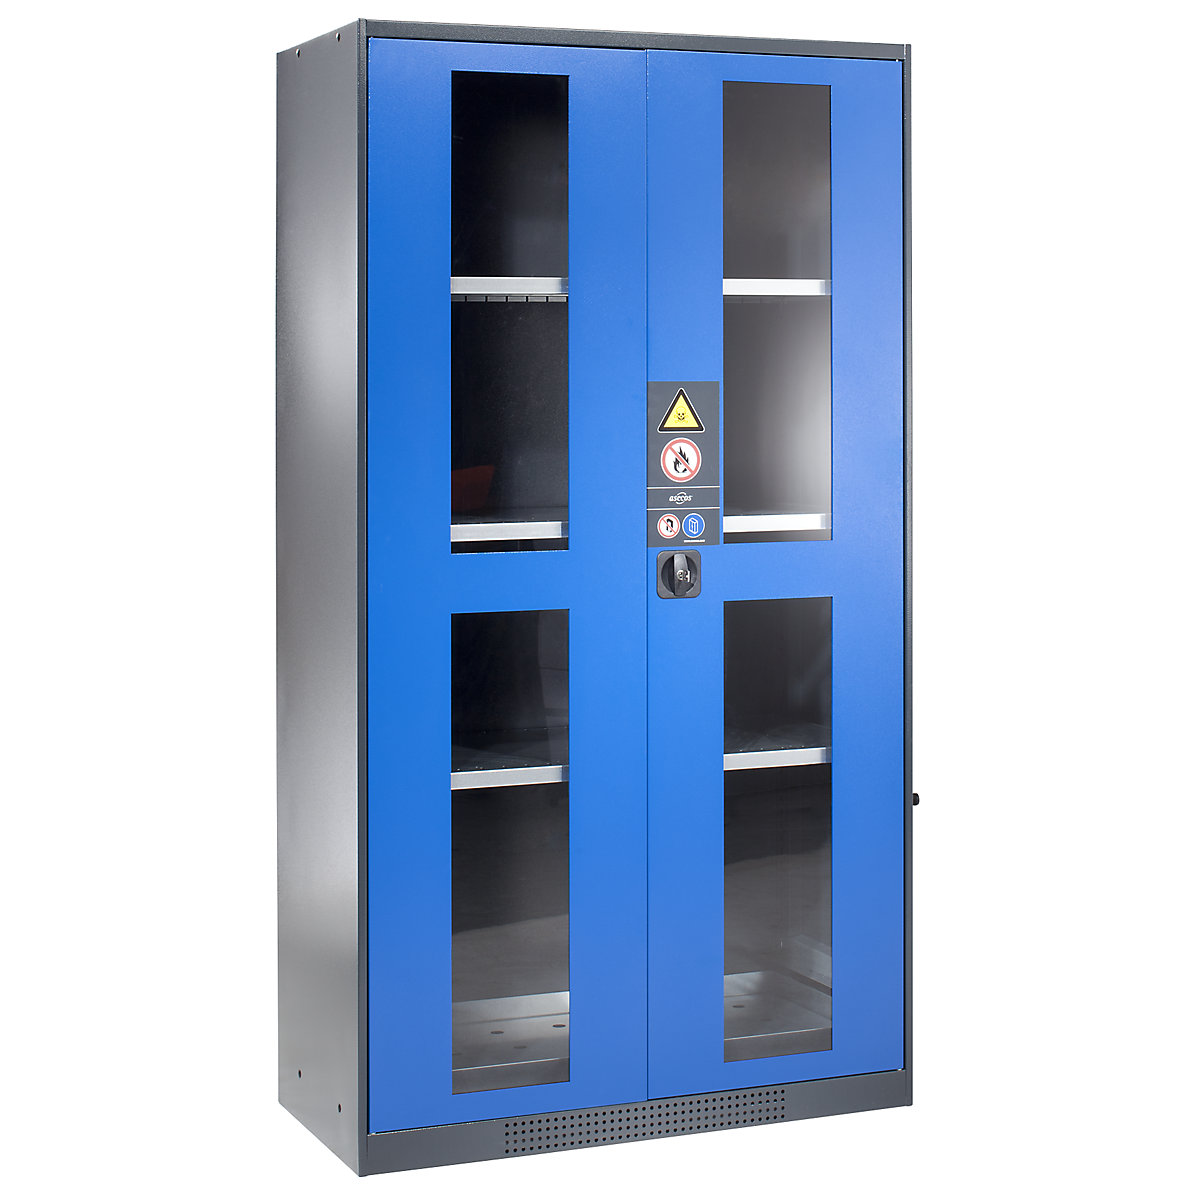 Chemical storage cupboard – asecos, door with vision panels, 3 shelves, gentian blue-5